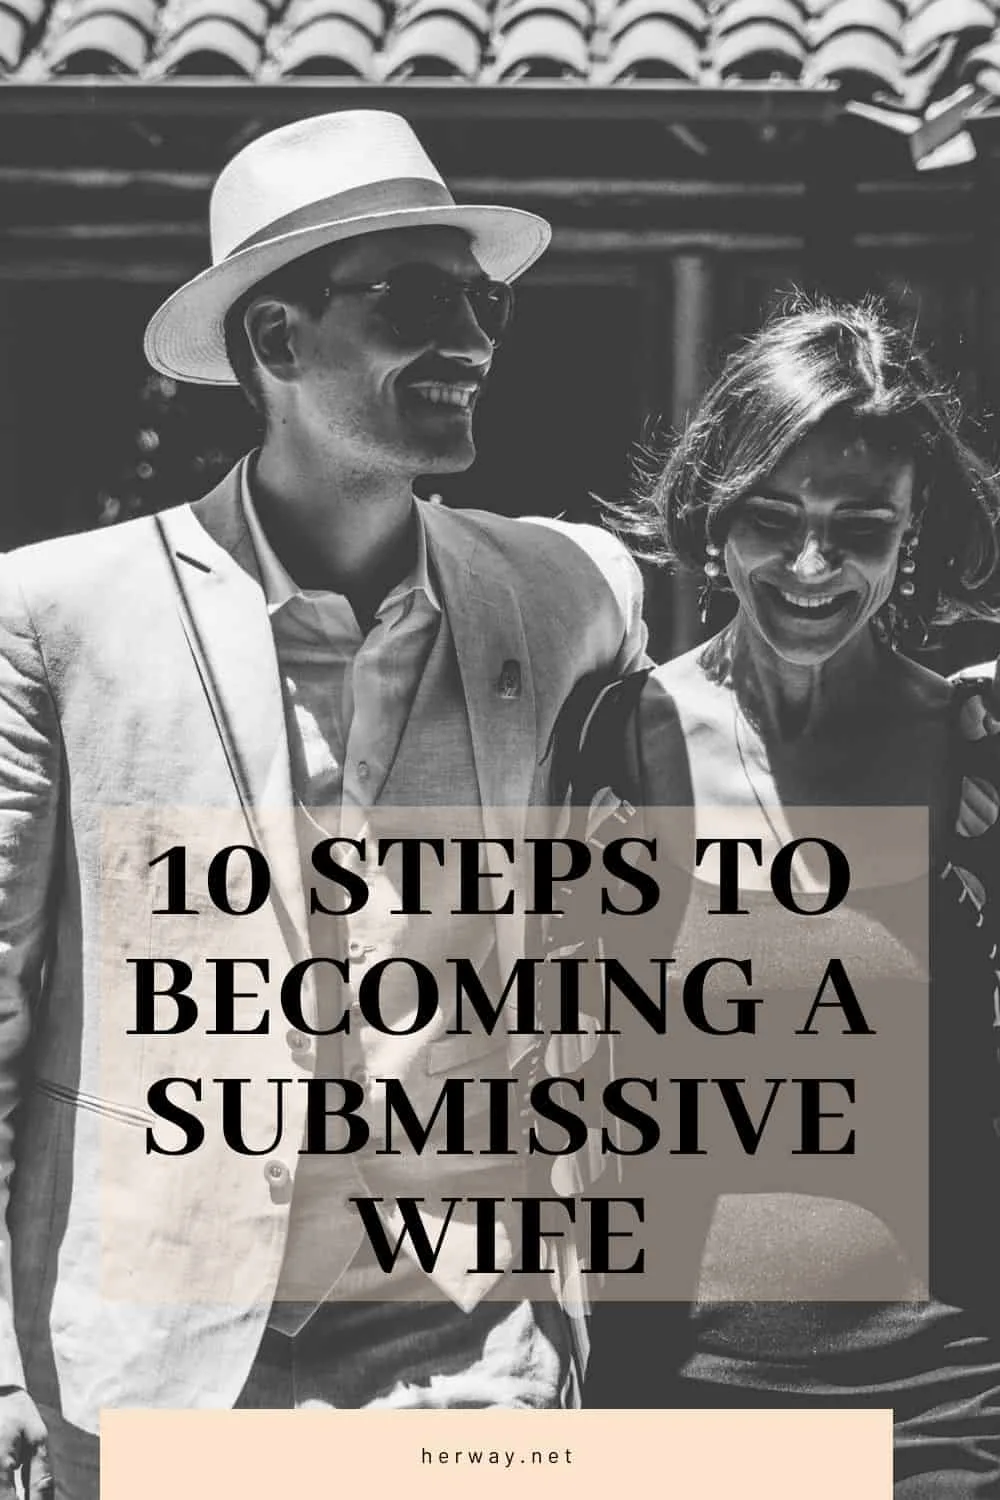 10 Steps To Becoming A Submissive Wife